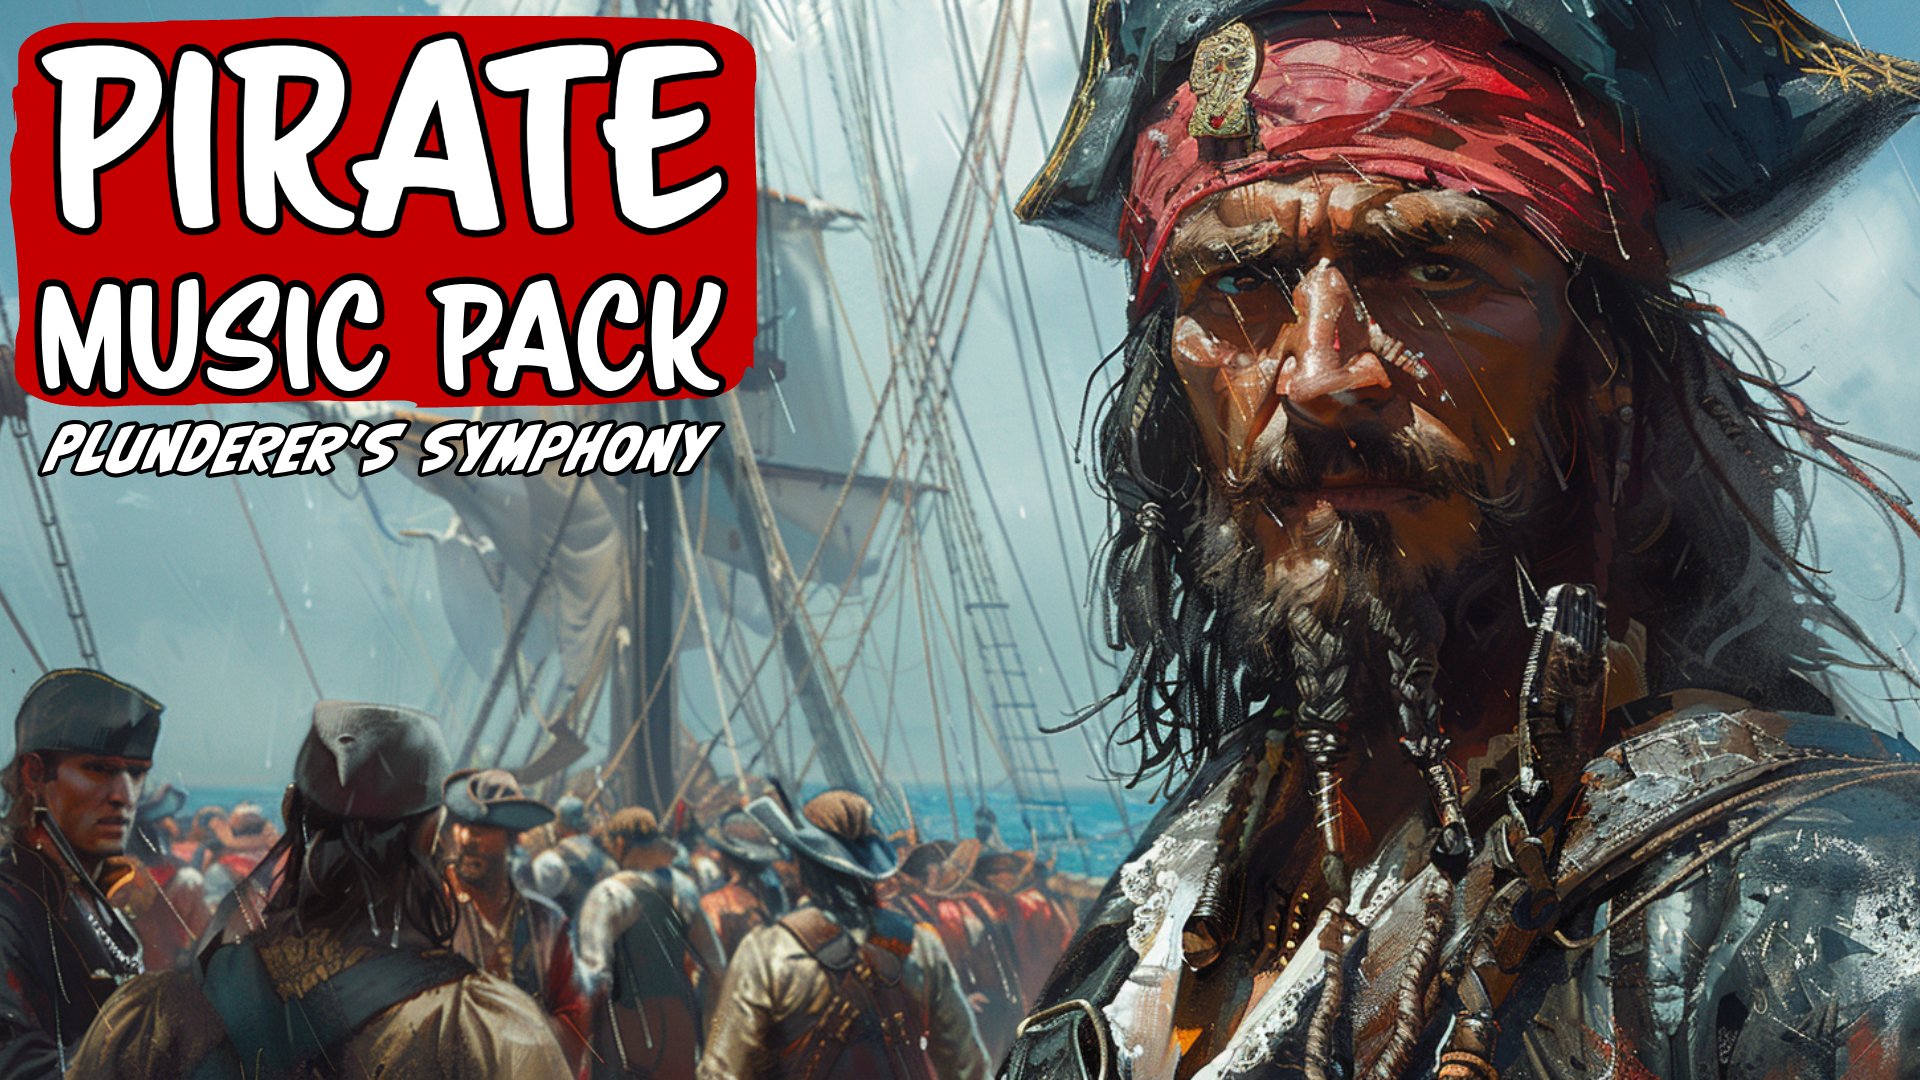 Pirate Music Pack: Plunderer's Symphony